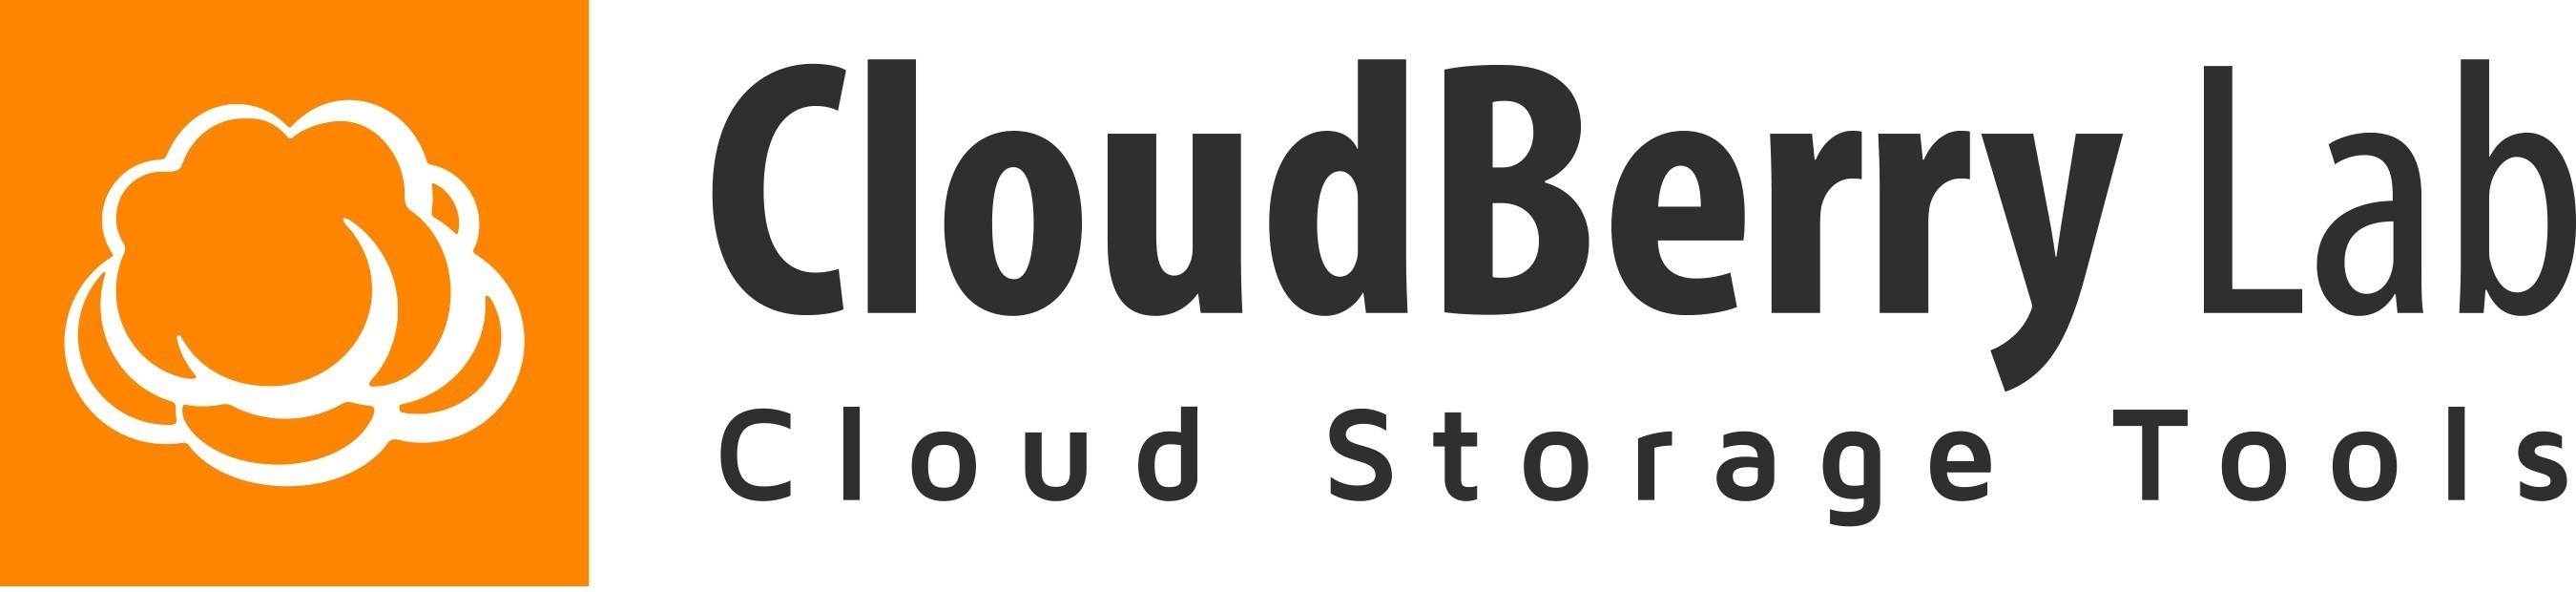 CloudBerry Lab(TM) provides cloud-based backup and file management services to small and mid-sized businesses (SMBs). (PRNewsFoto/CloudBerry Lab)